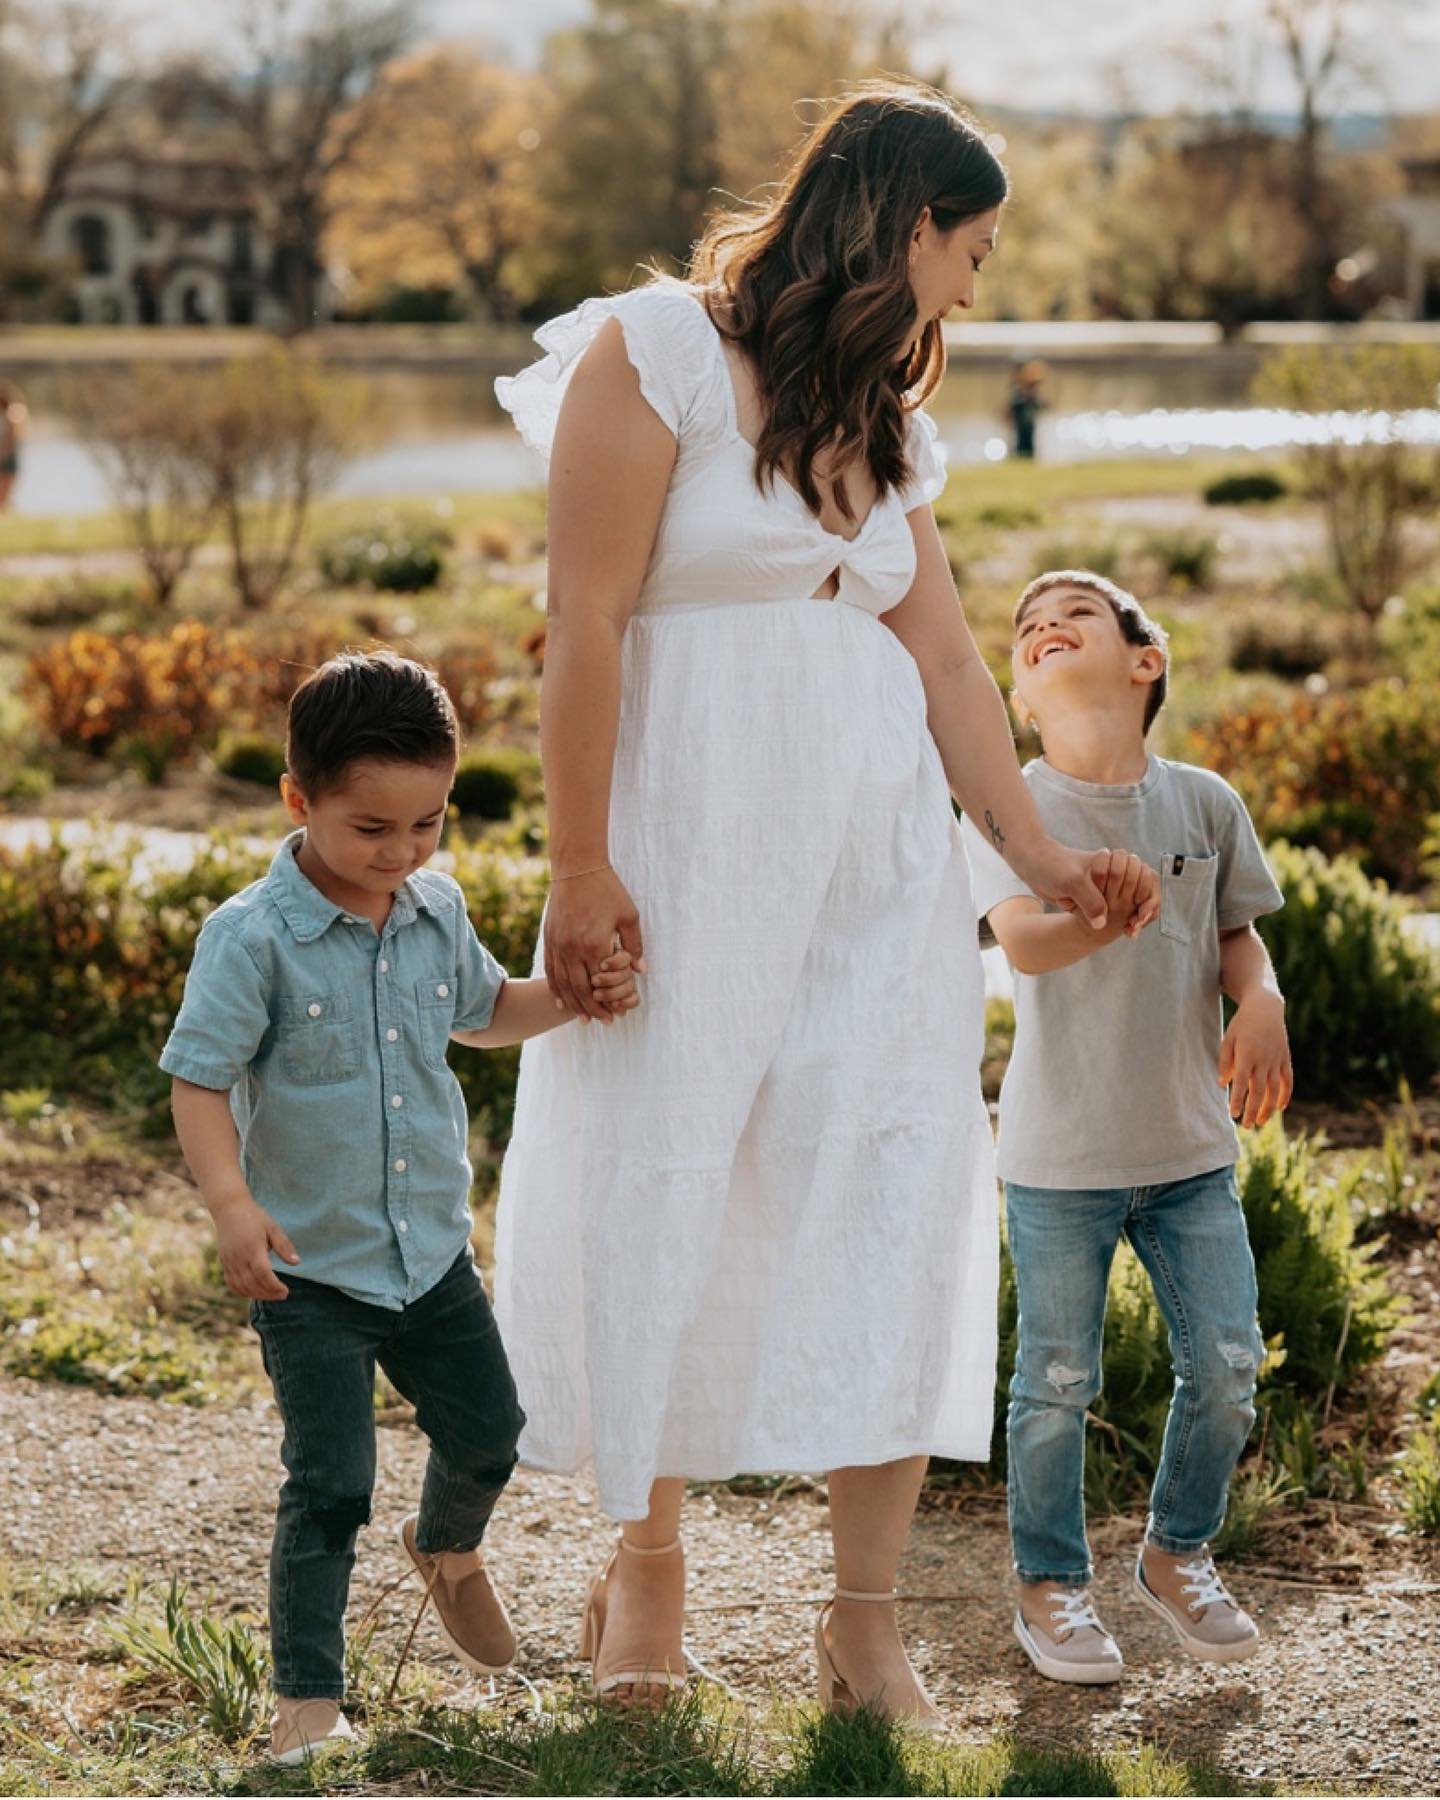 More fun on spring mini sessions! Love this Mother&rsquo;s Day shoot I did for @alexani.02 ❤️
.
.
.

.

.
.

#familyphotography  #familyphotographer #photography #coloradophotography #coloradophotographer #coloradofamilyphotographer #coloradofamily #